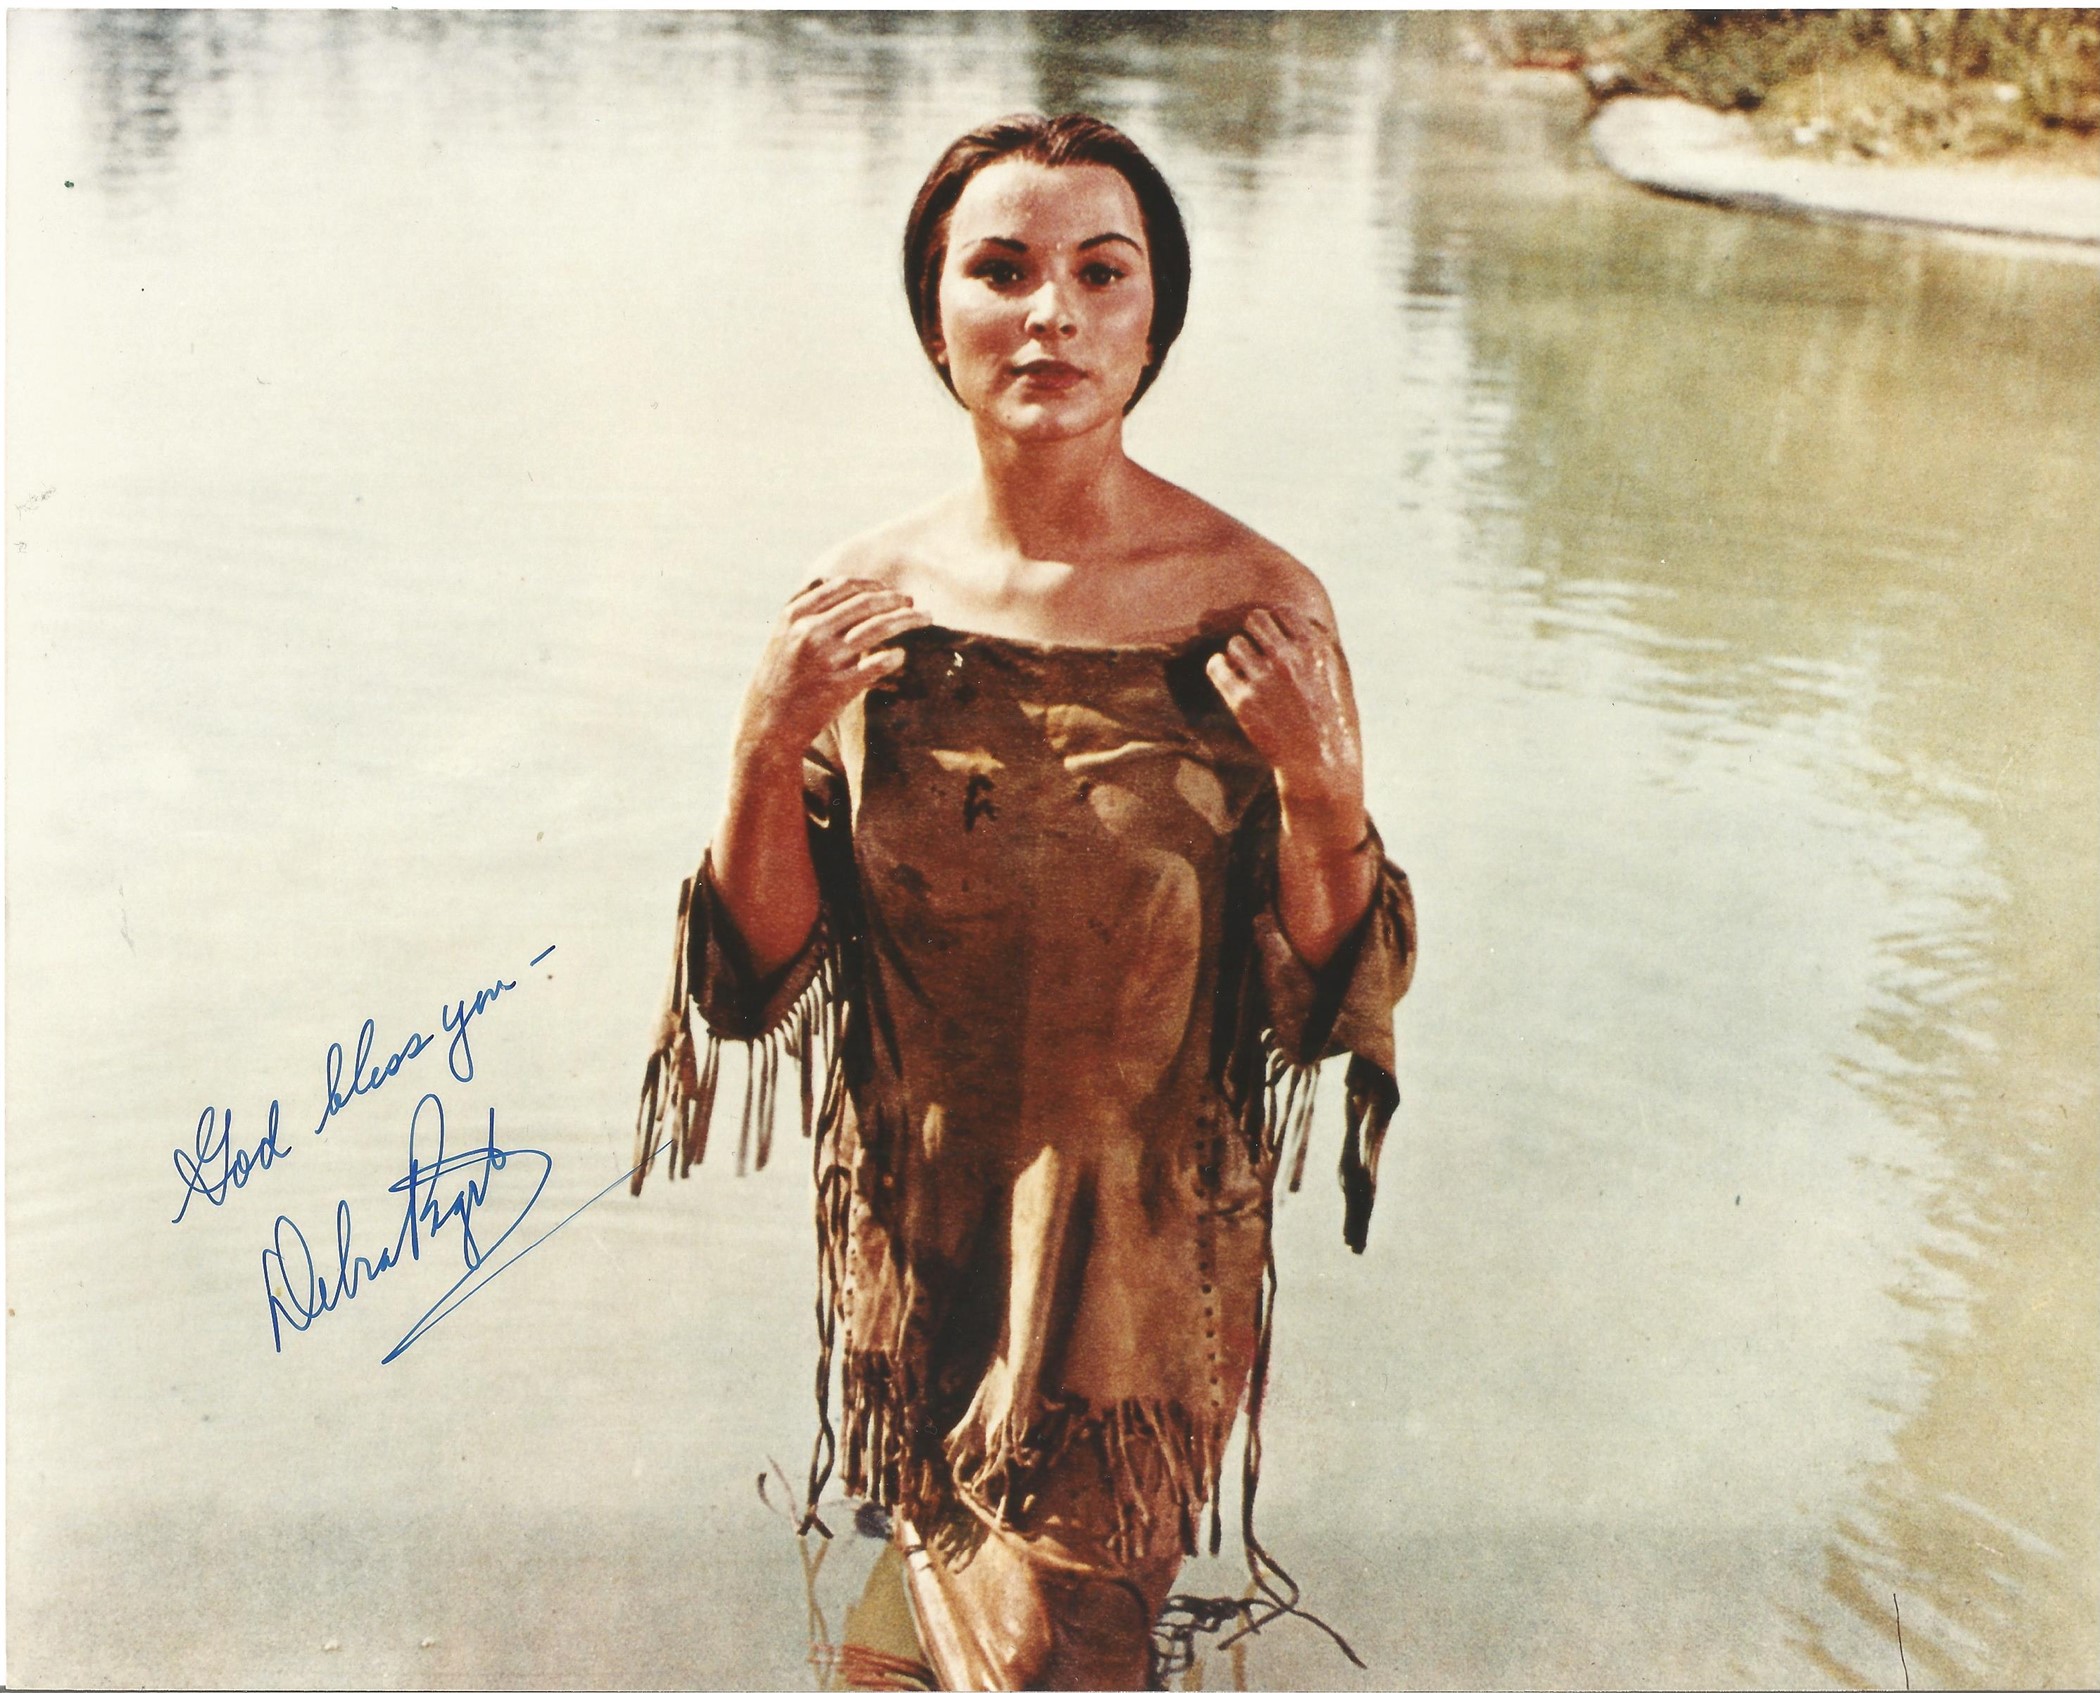 Debra Paget signed 10 x 8 inch colour photo. Paget is an American actress and entertainer. She is